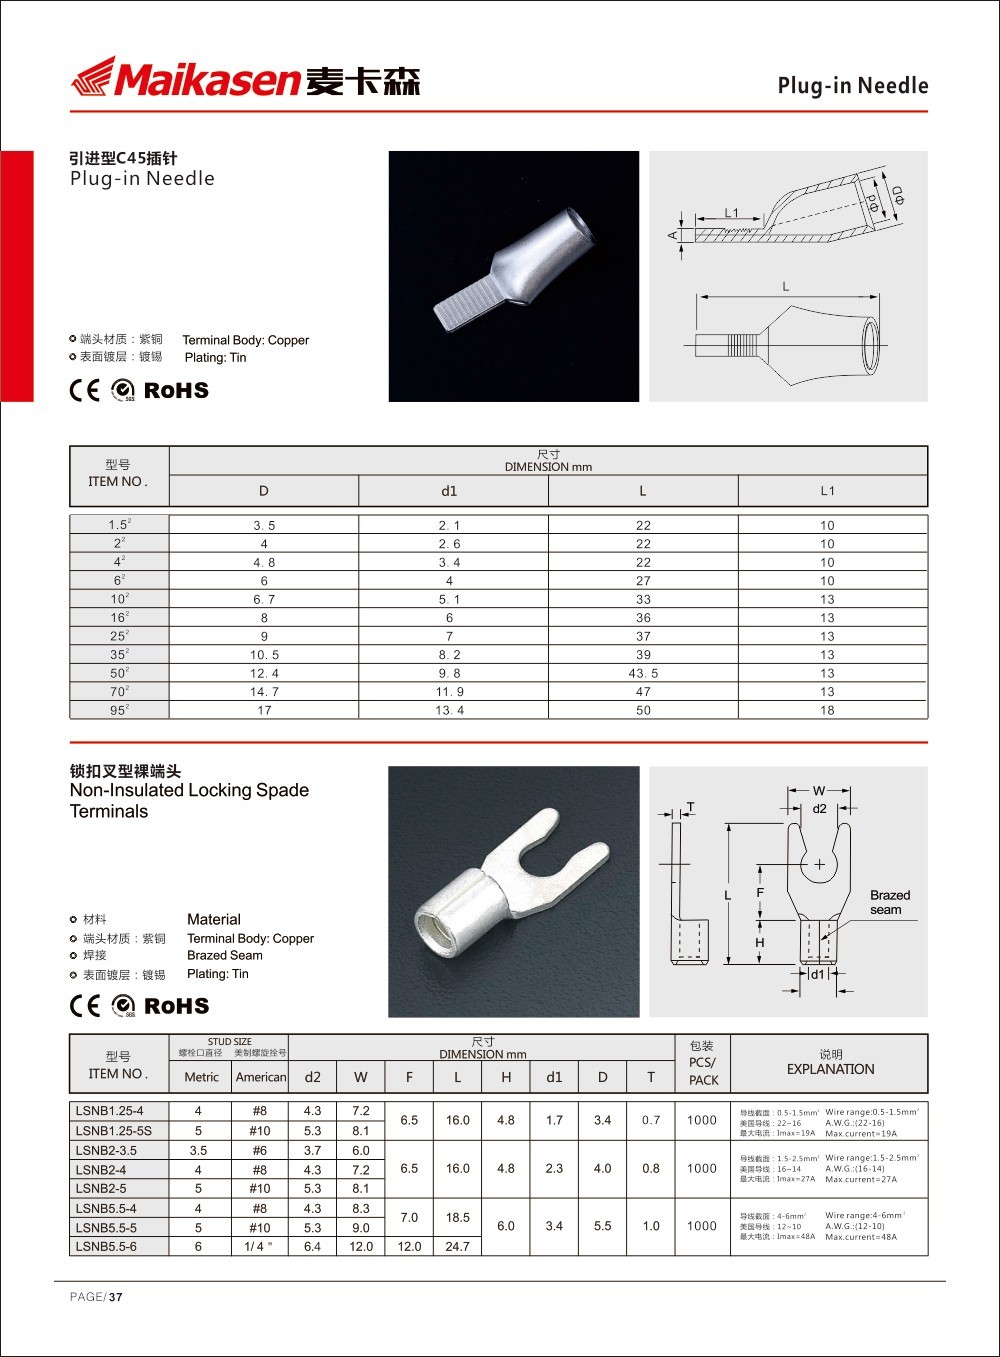 MKS cable joint wholesale for instrument